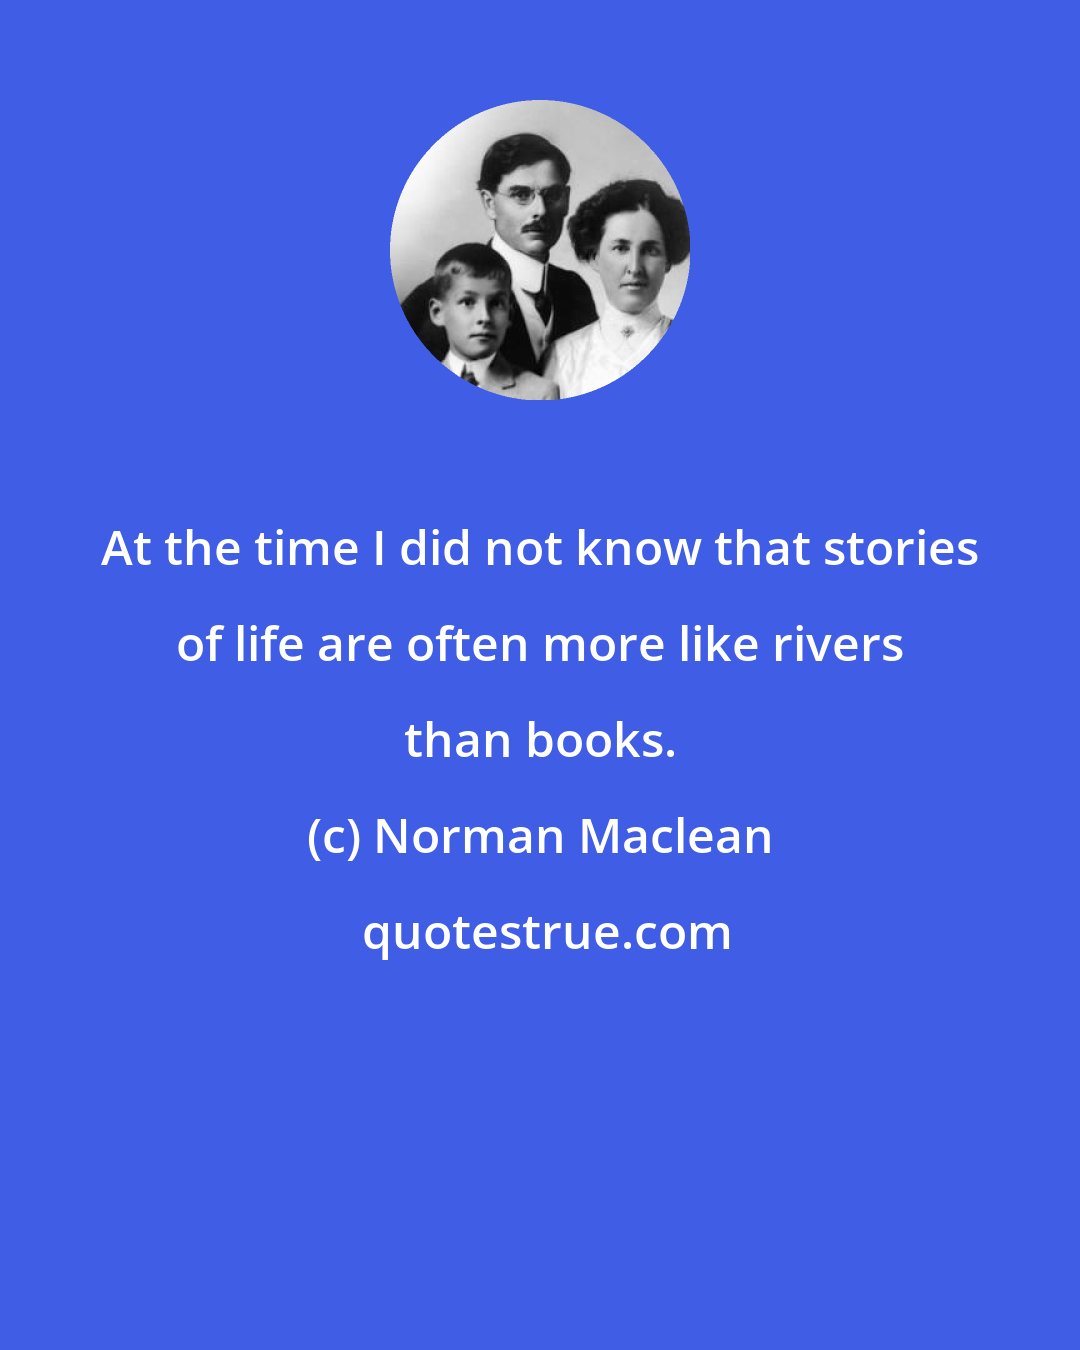 Norman Maclean: At the time I did not know that stories of life are often more like rivers than books.